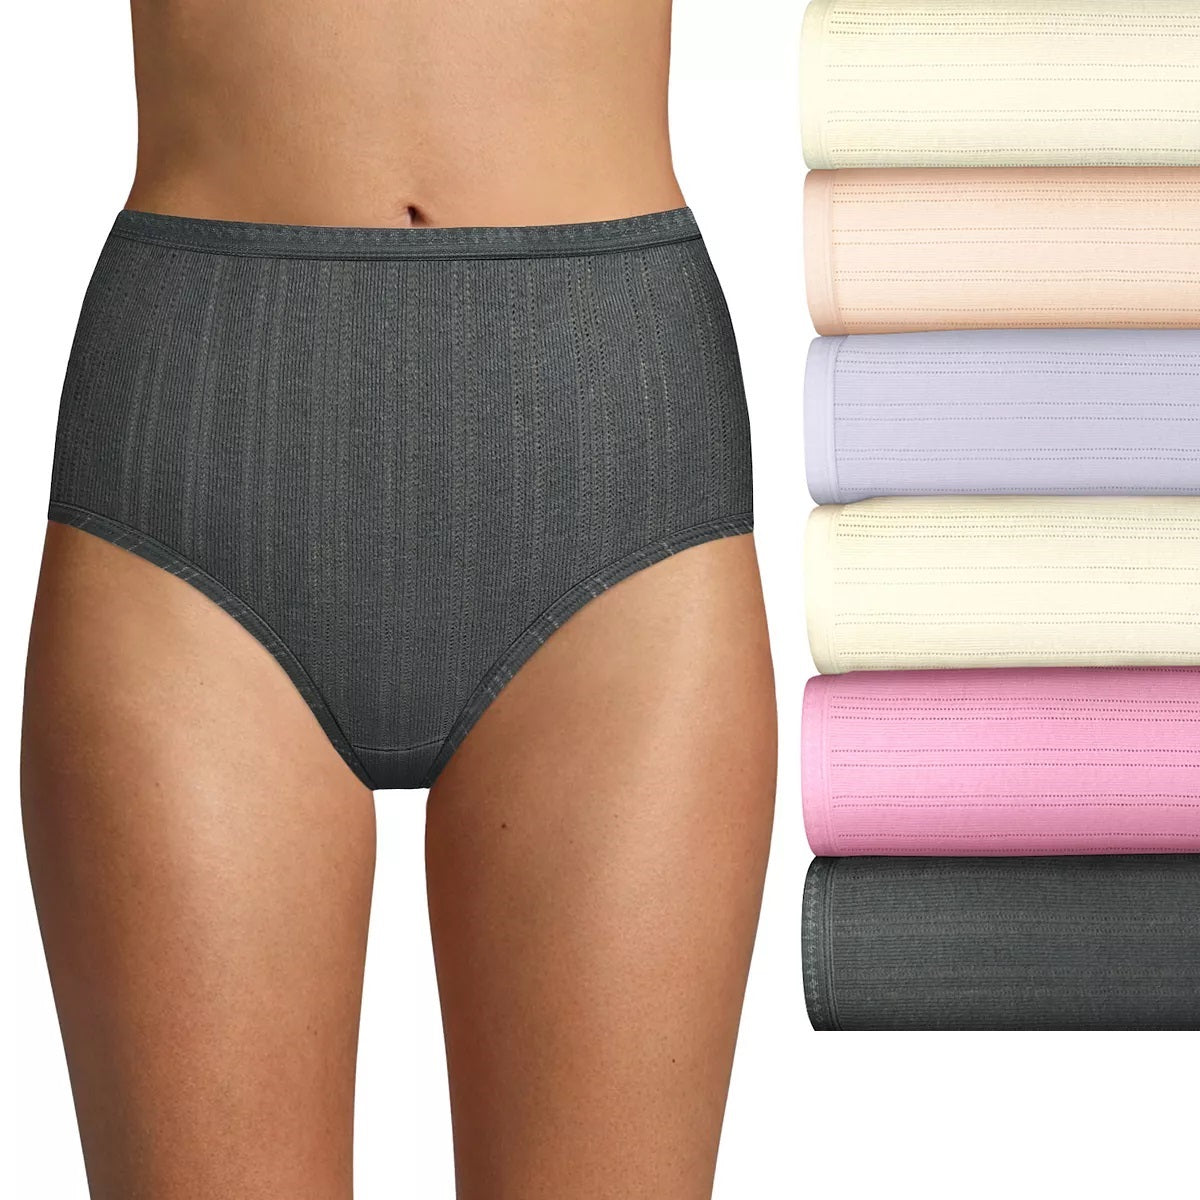 Women's Signature Cotton Breathe Briefs Underwear Pack, 6-Pack (Colors May  Vary)